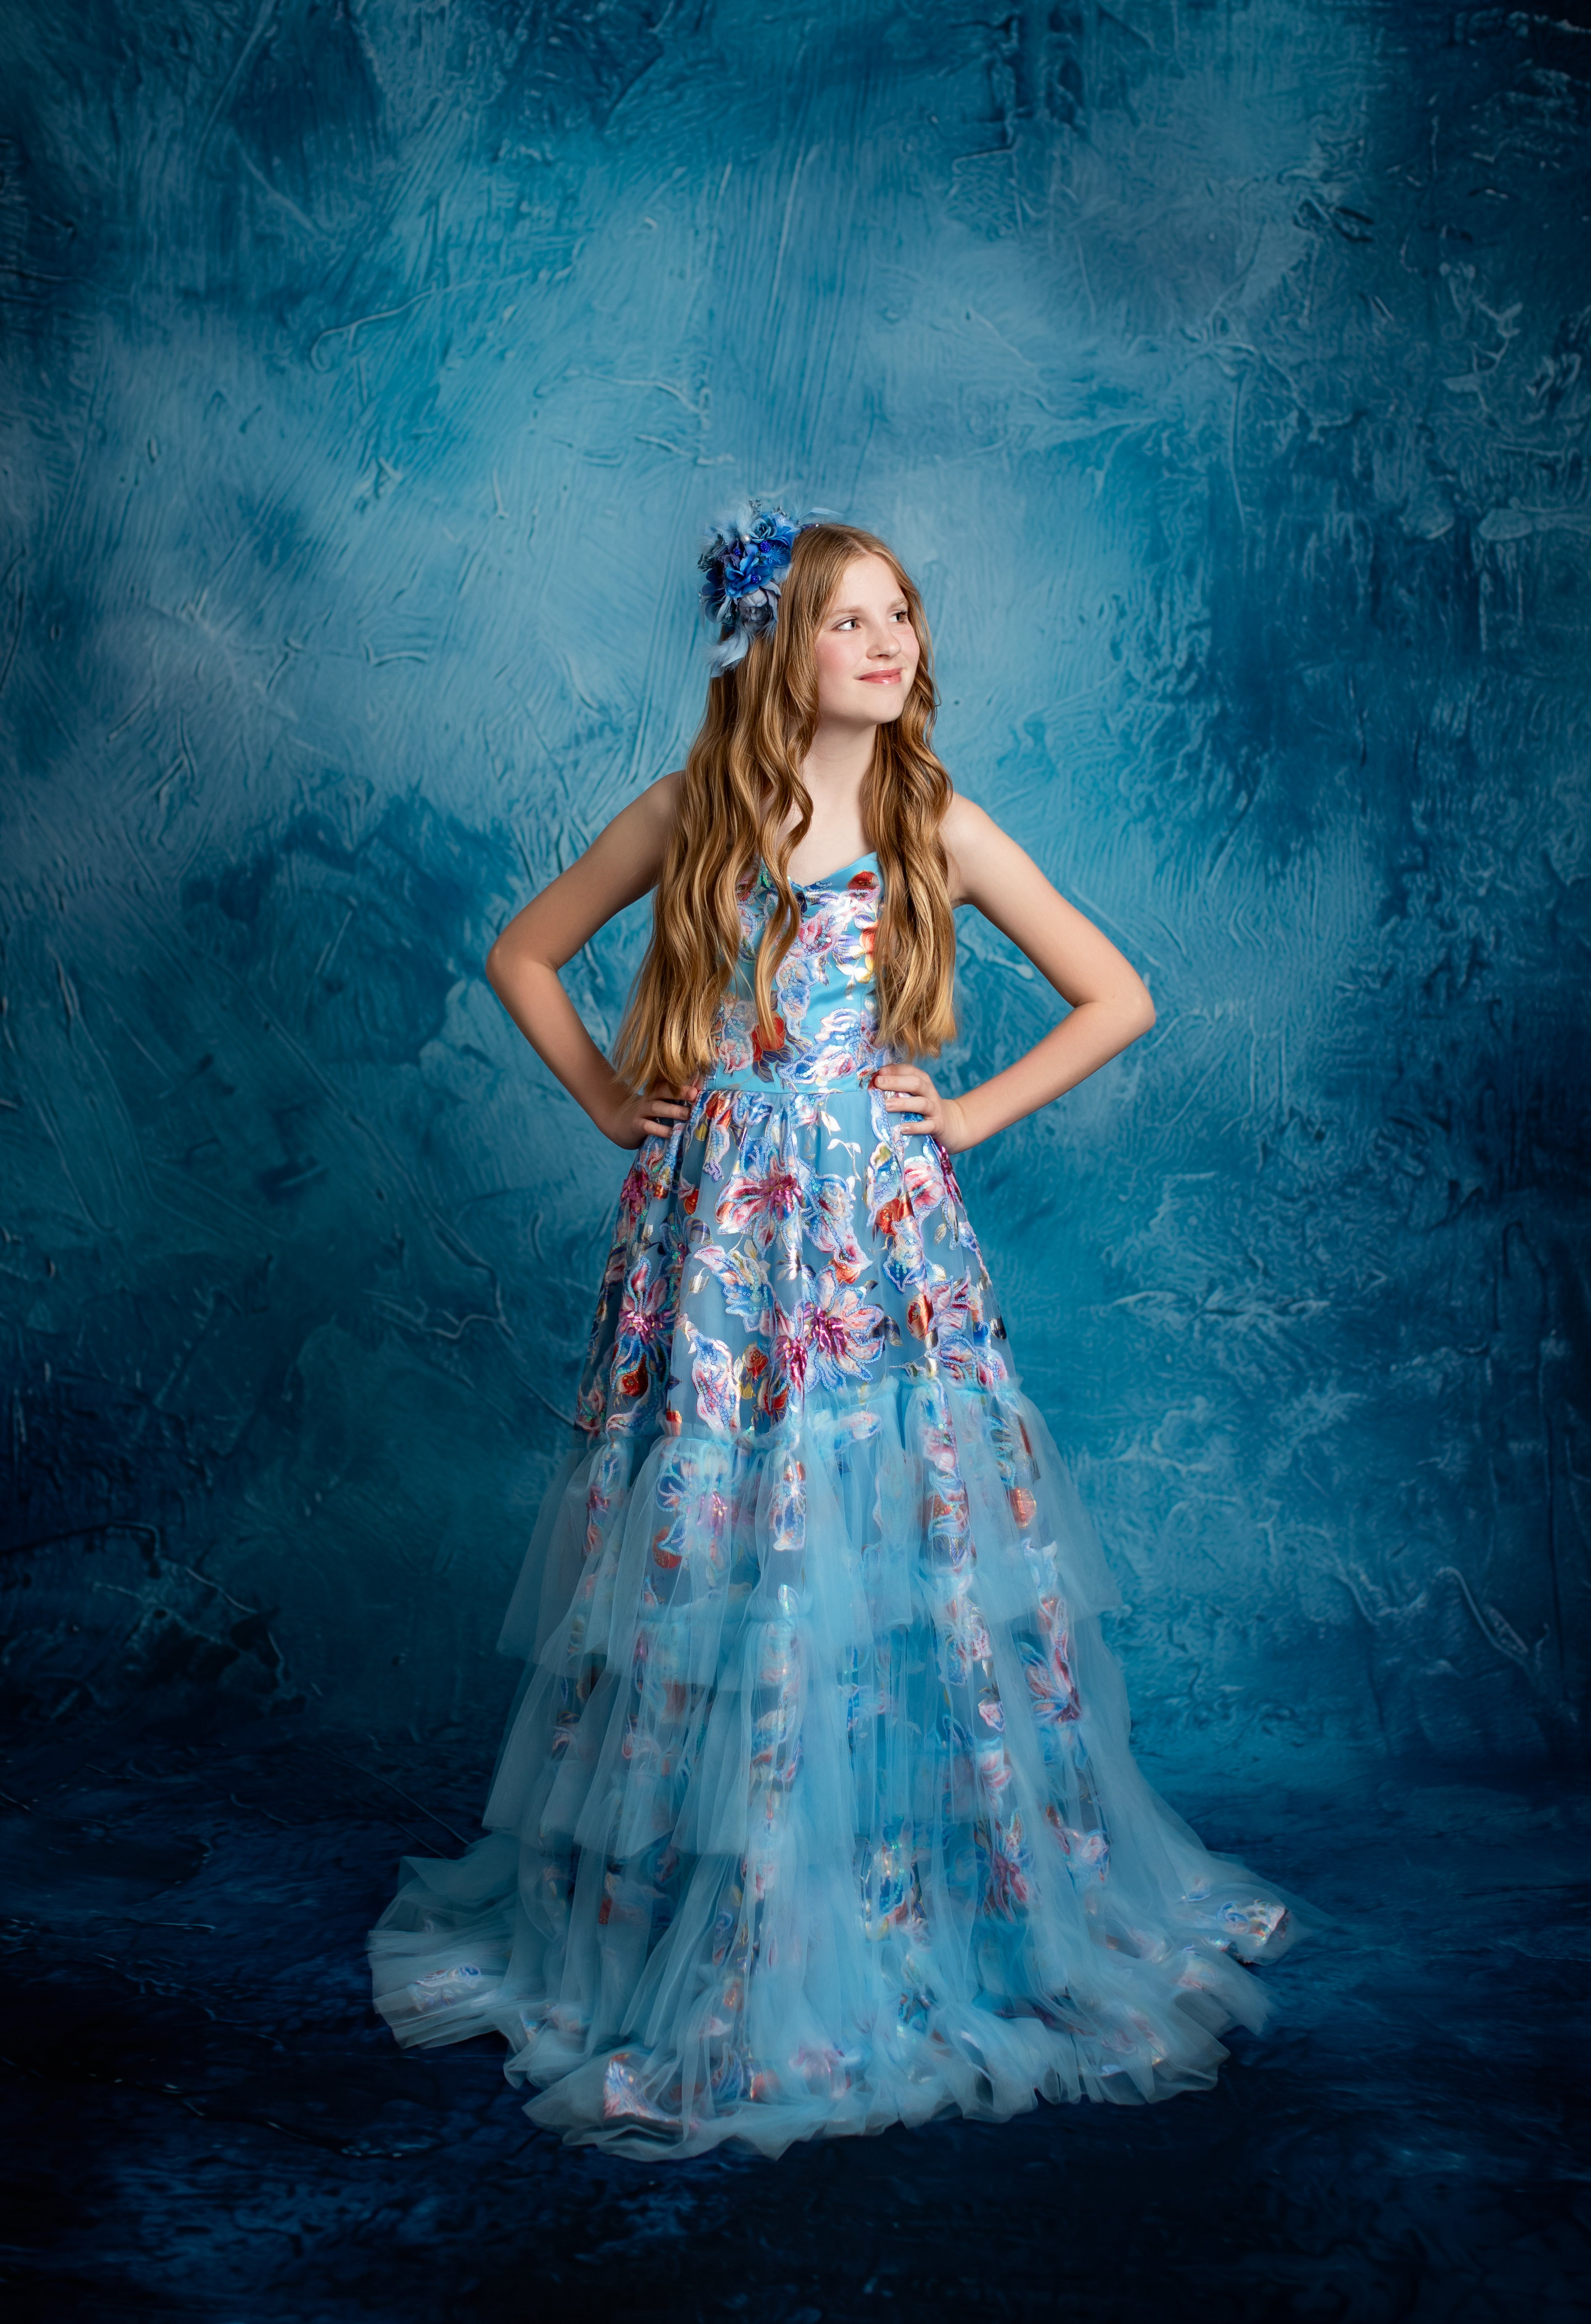 Beautiful blue gowns for photography sessions